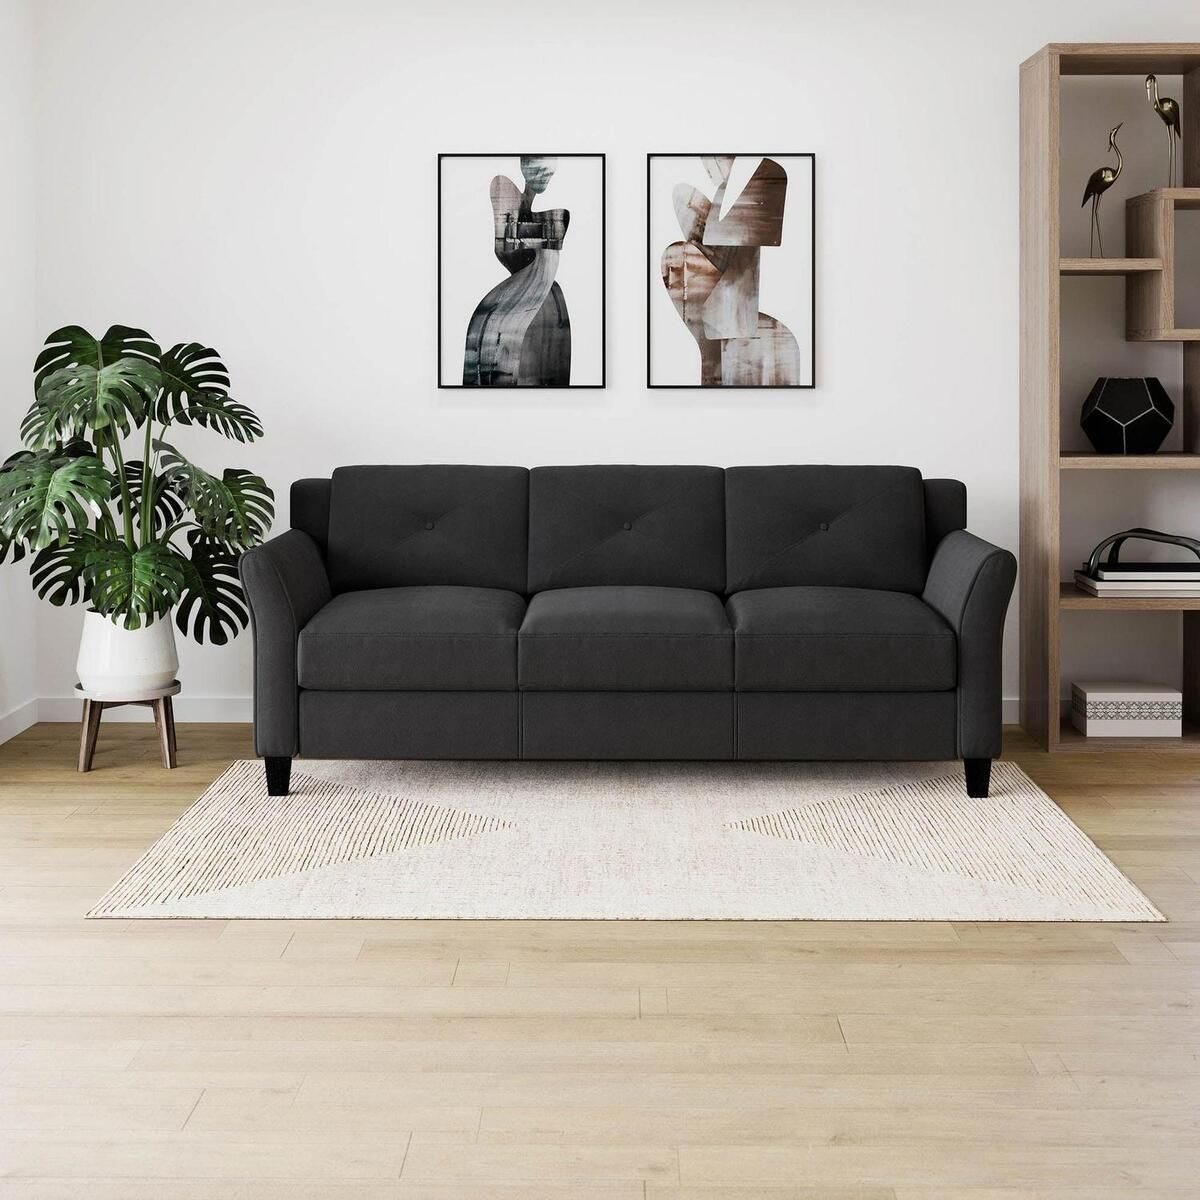 Traditional Sofa Curved Rolled Arms Comfortable Taryn Black Fabric | Ebay Pertaining To Traditional Black Fabric Sofas (View 5 of 15)